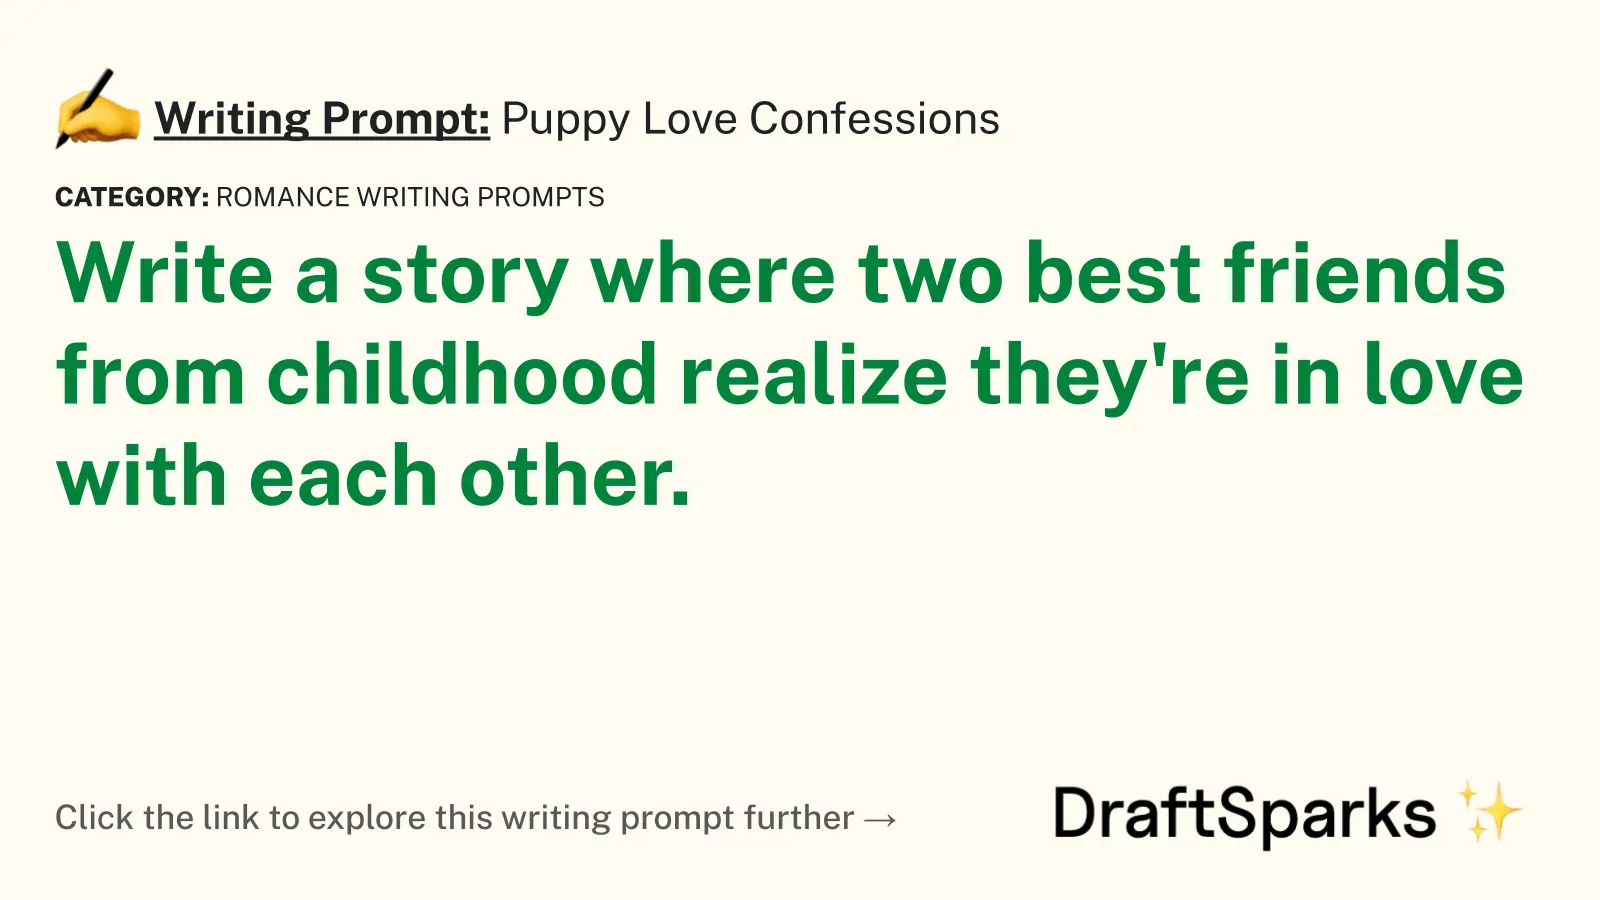 Puppy Love Confessions